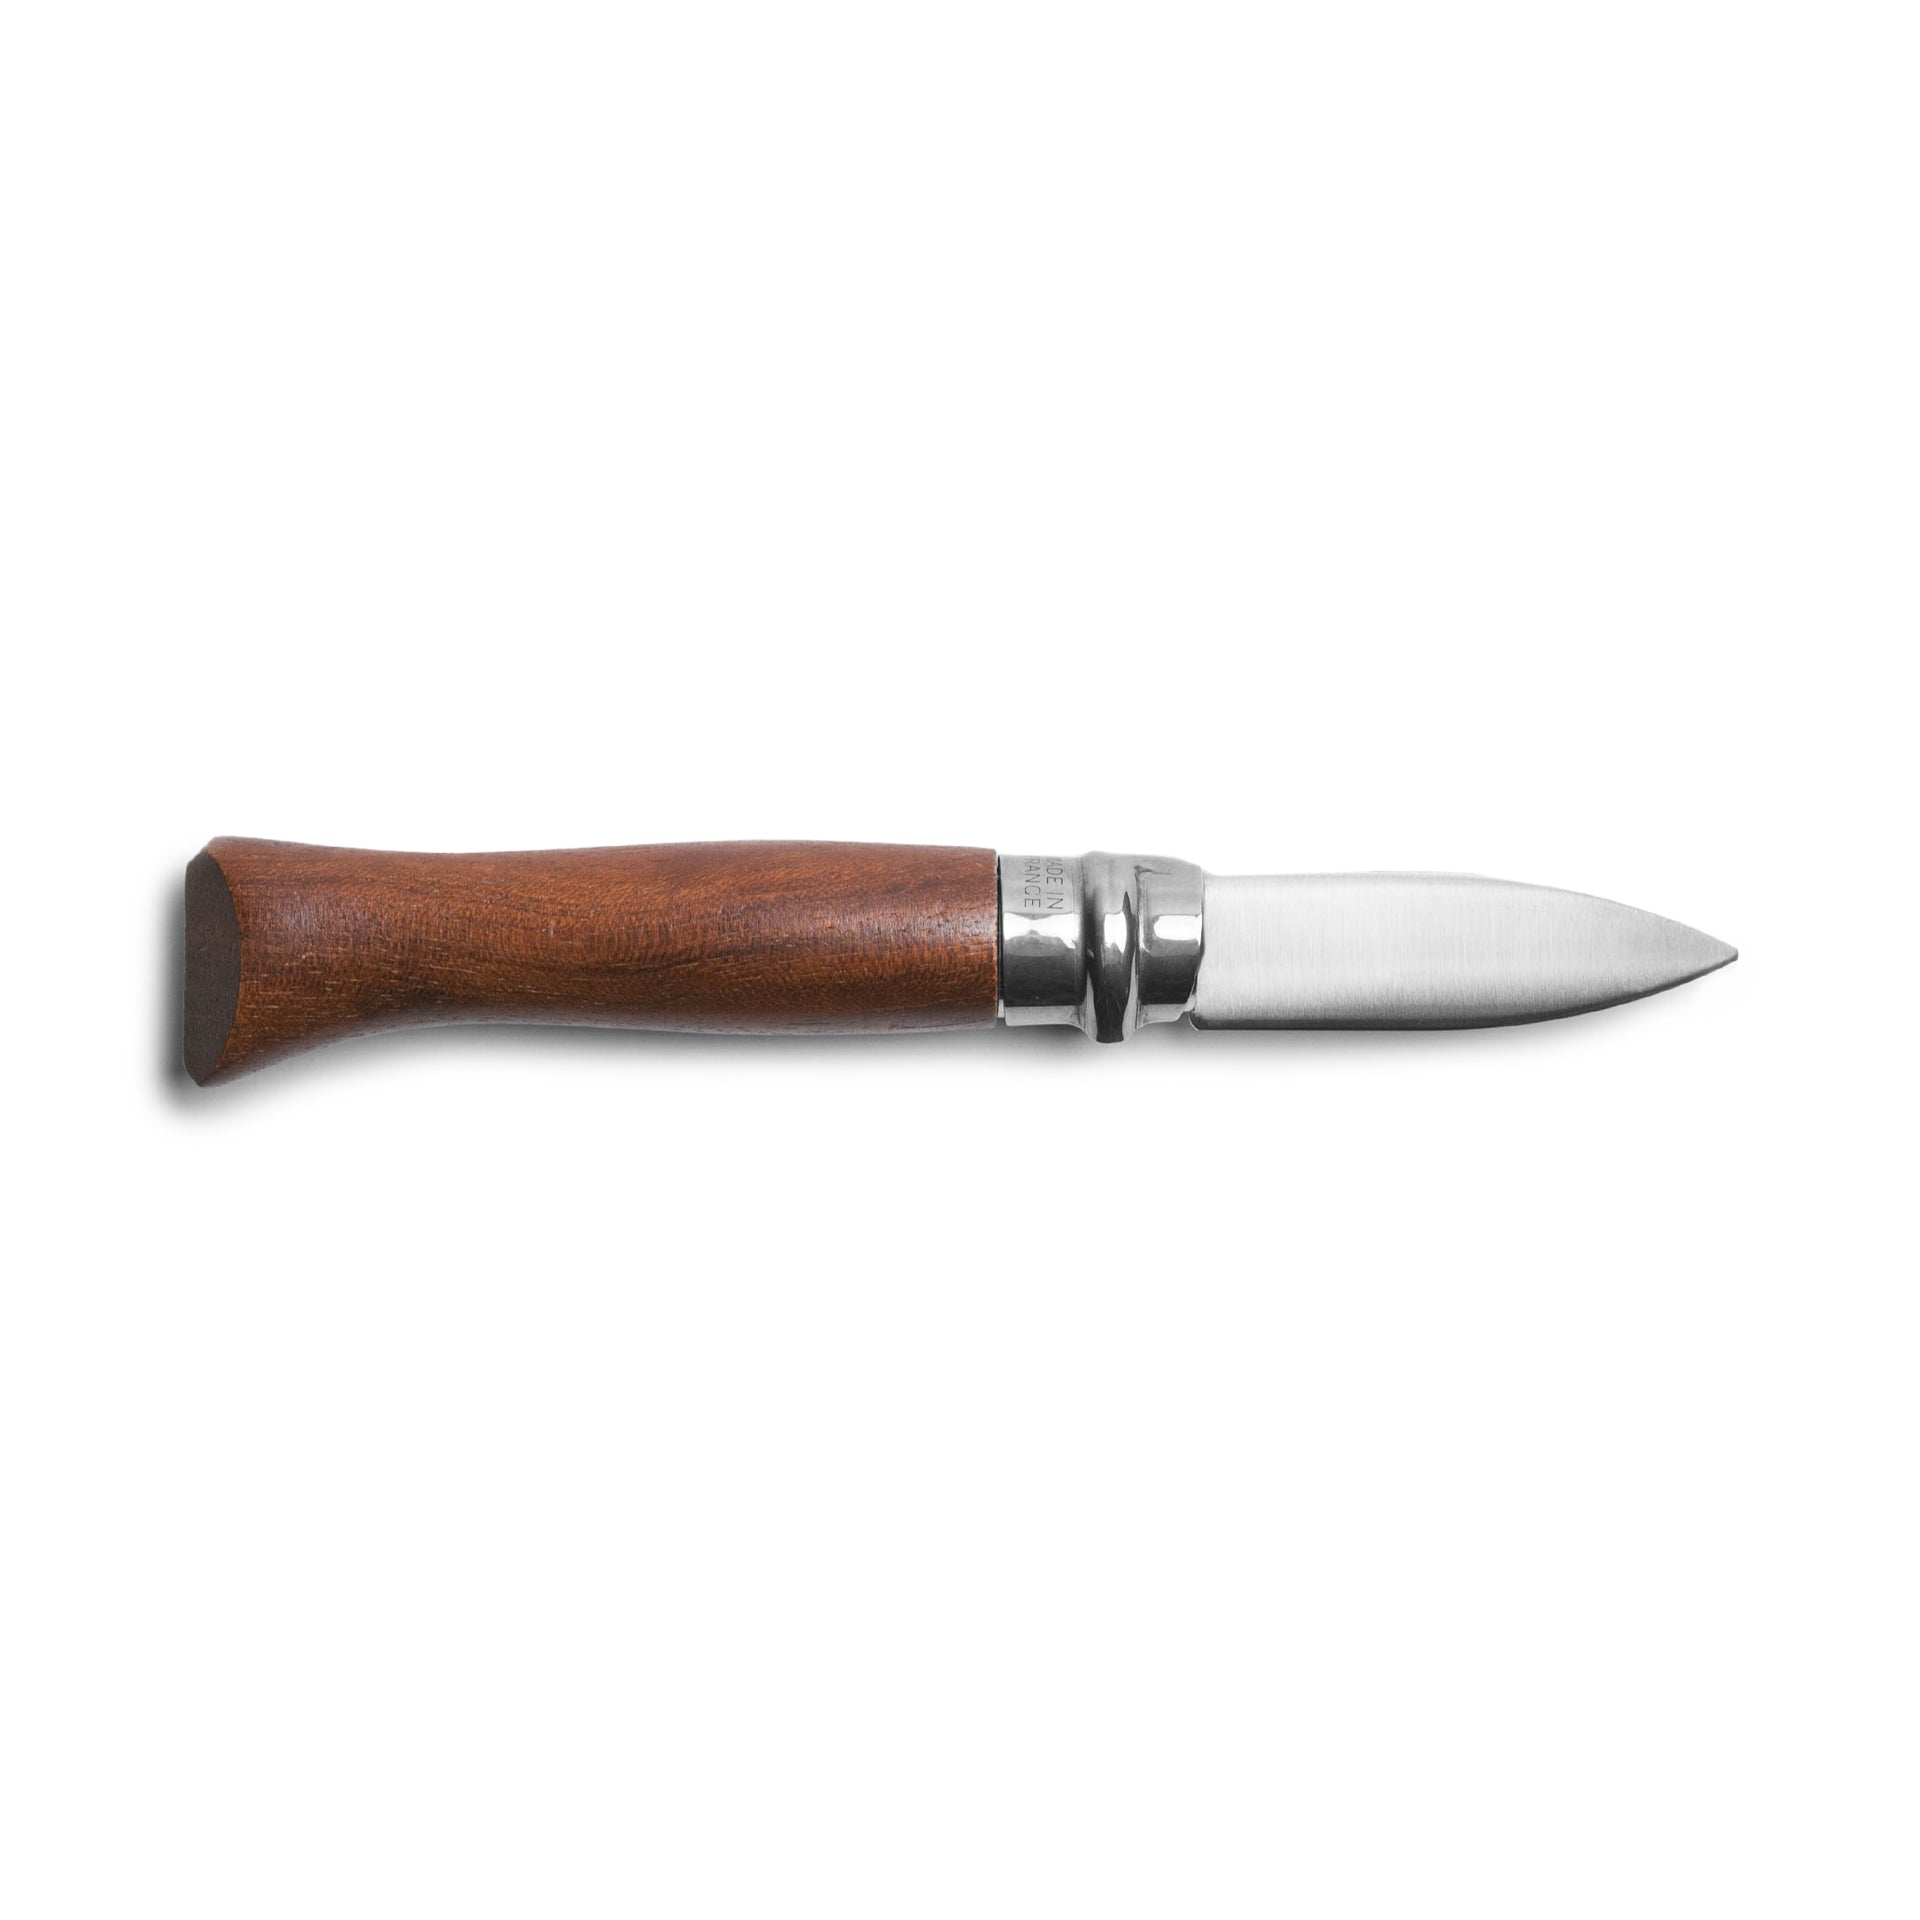 Oyster and shell knife Opinel